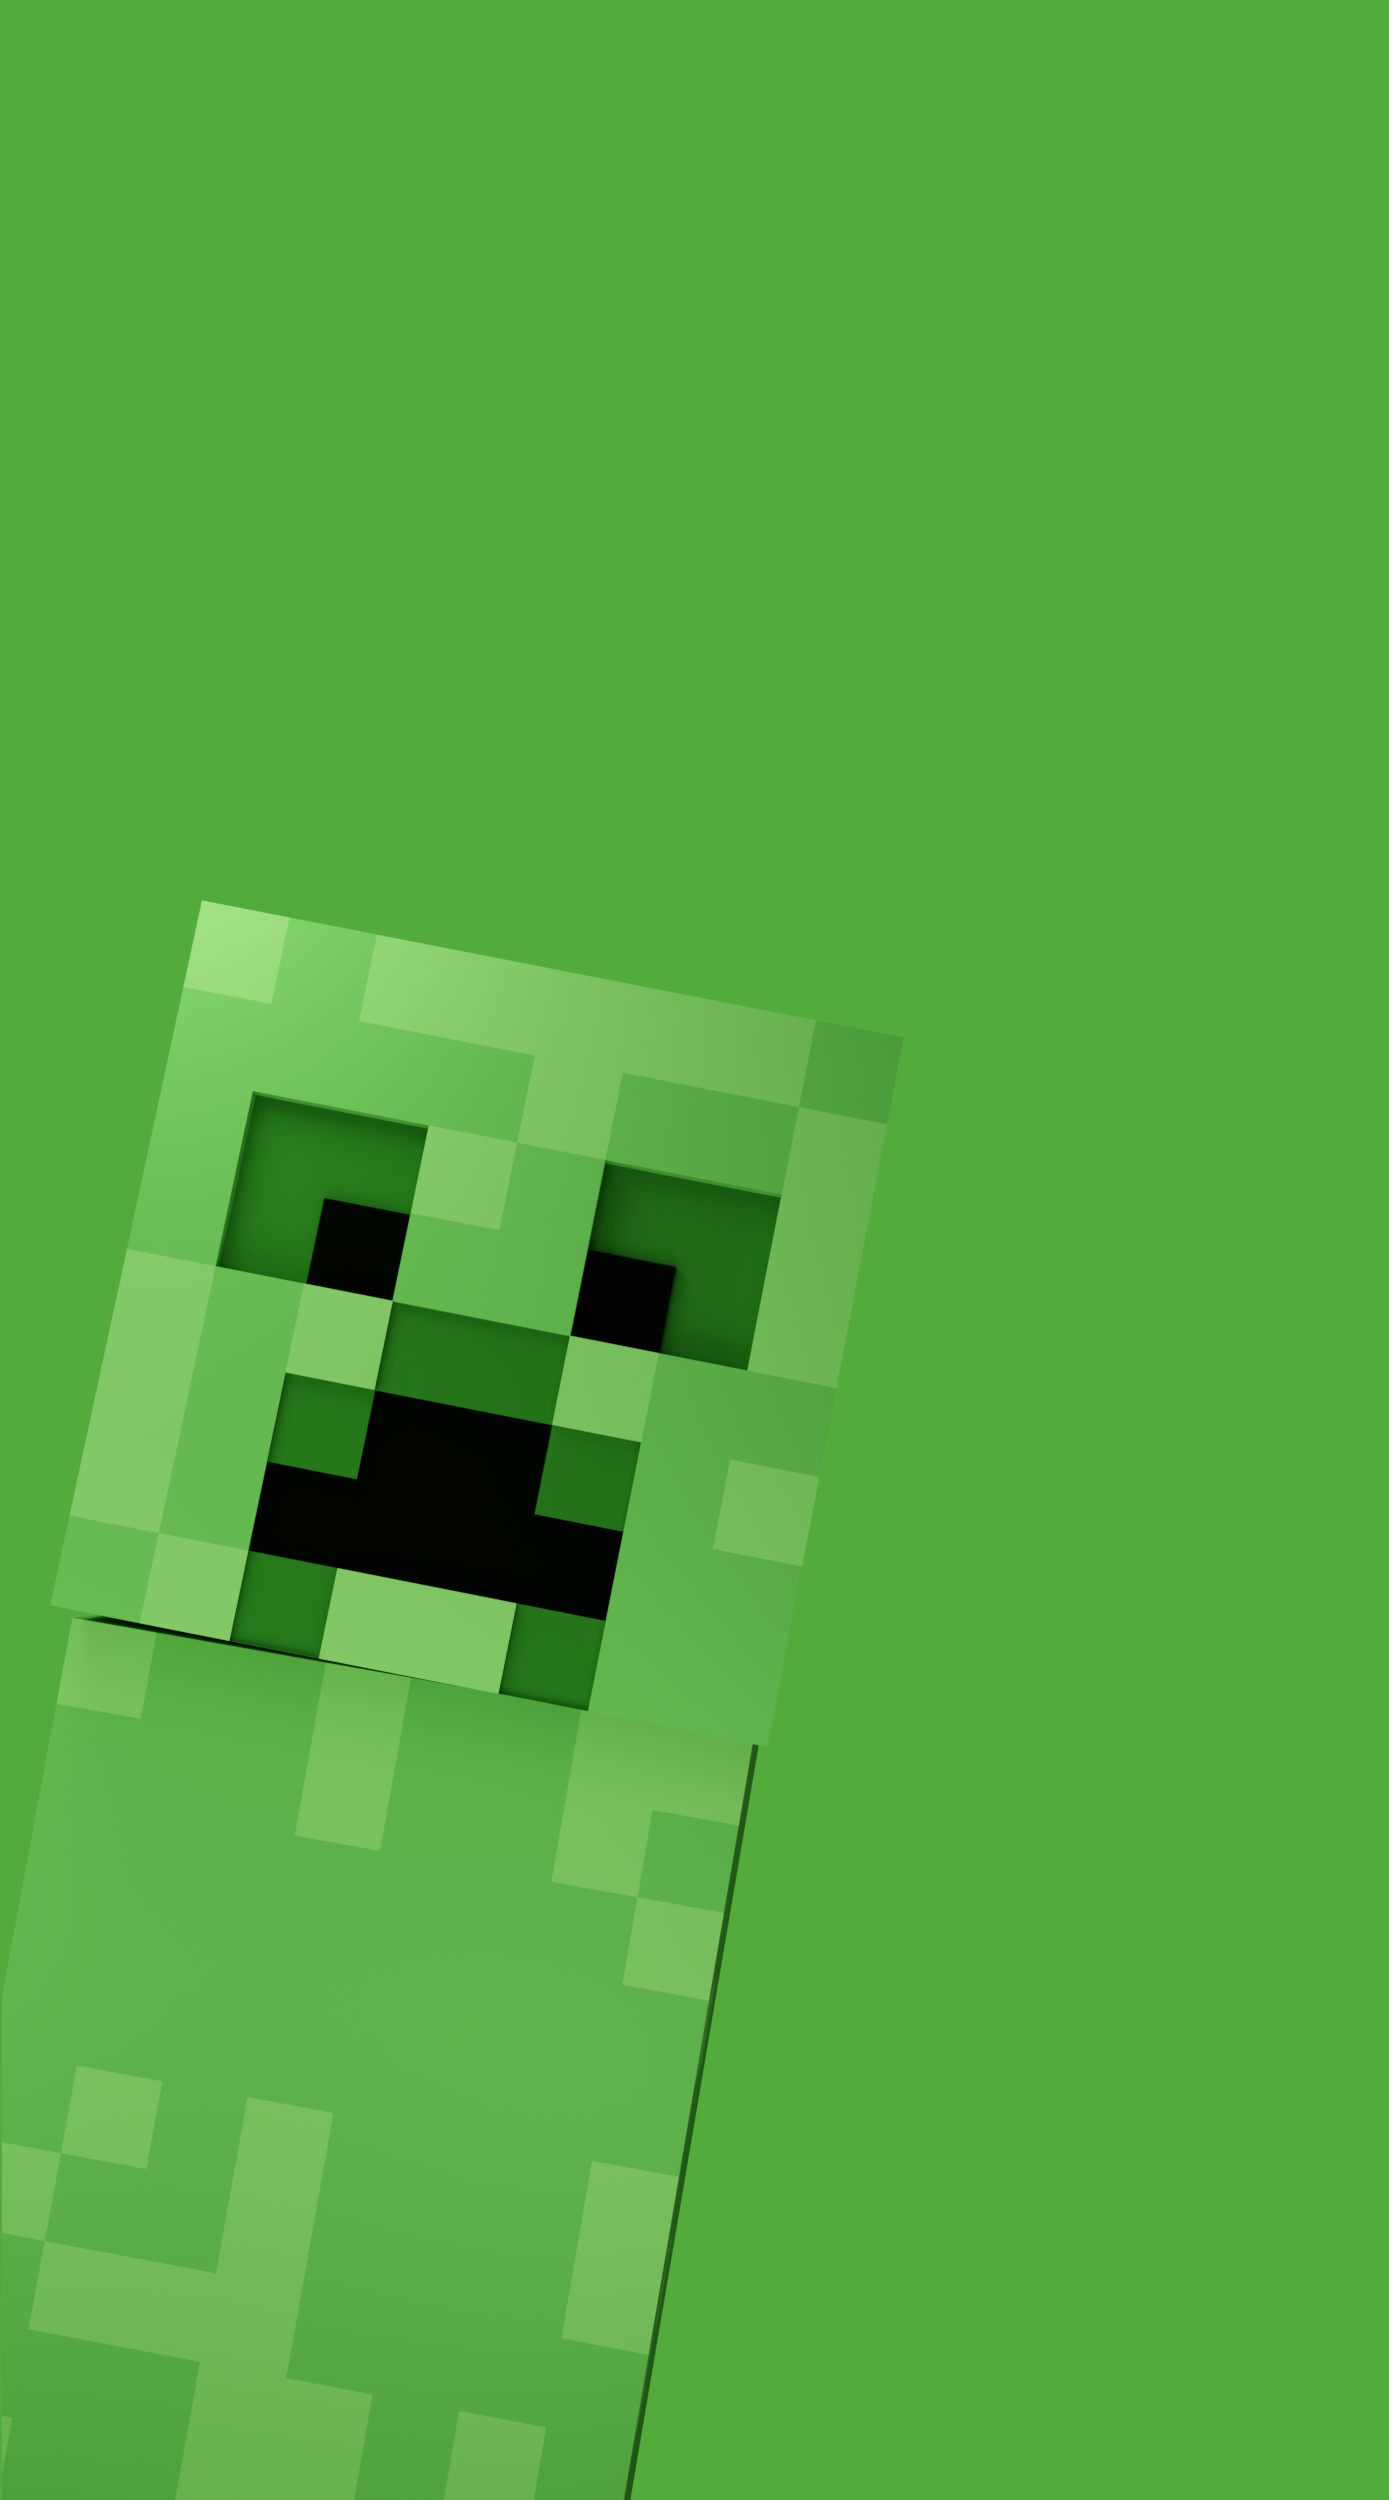 25 Epic Minecraft Wallpapers  Backgrounds  Minecraft wallpaper Minecraft  shaders Minecraft pictures